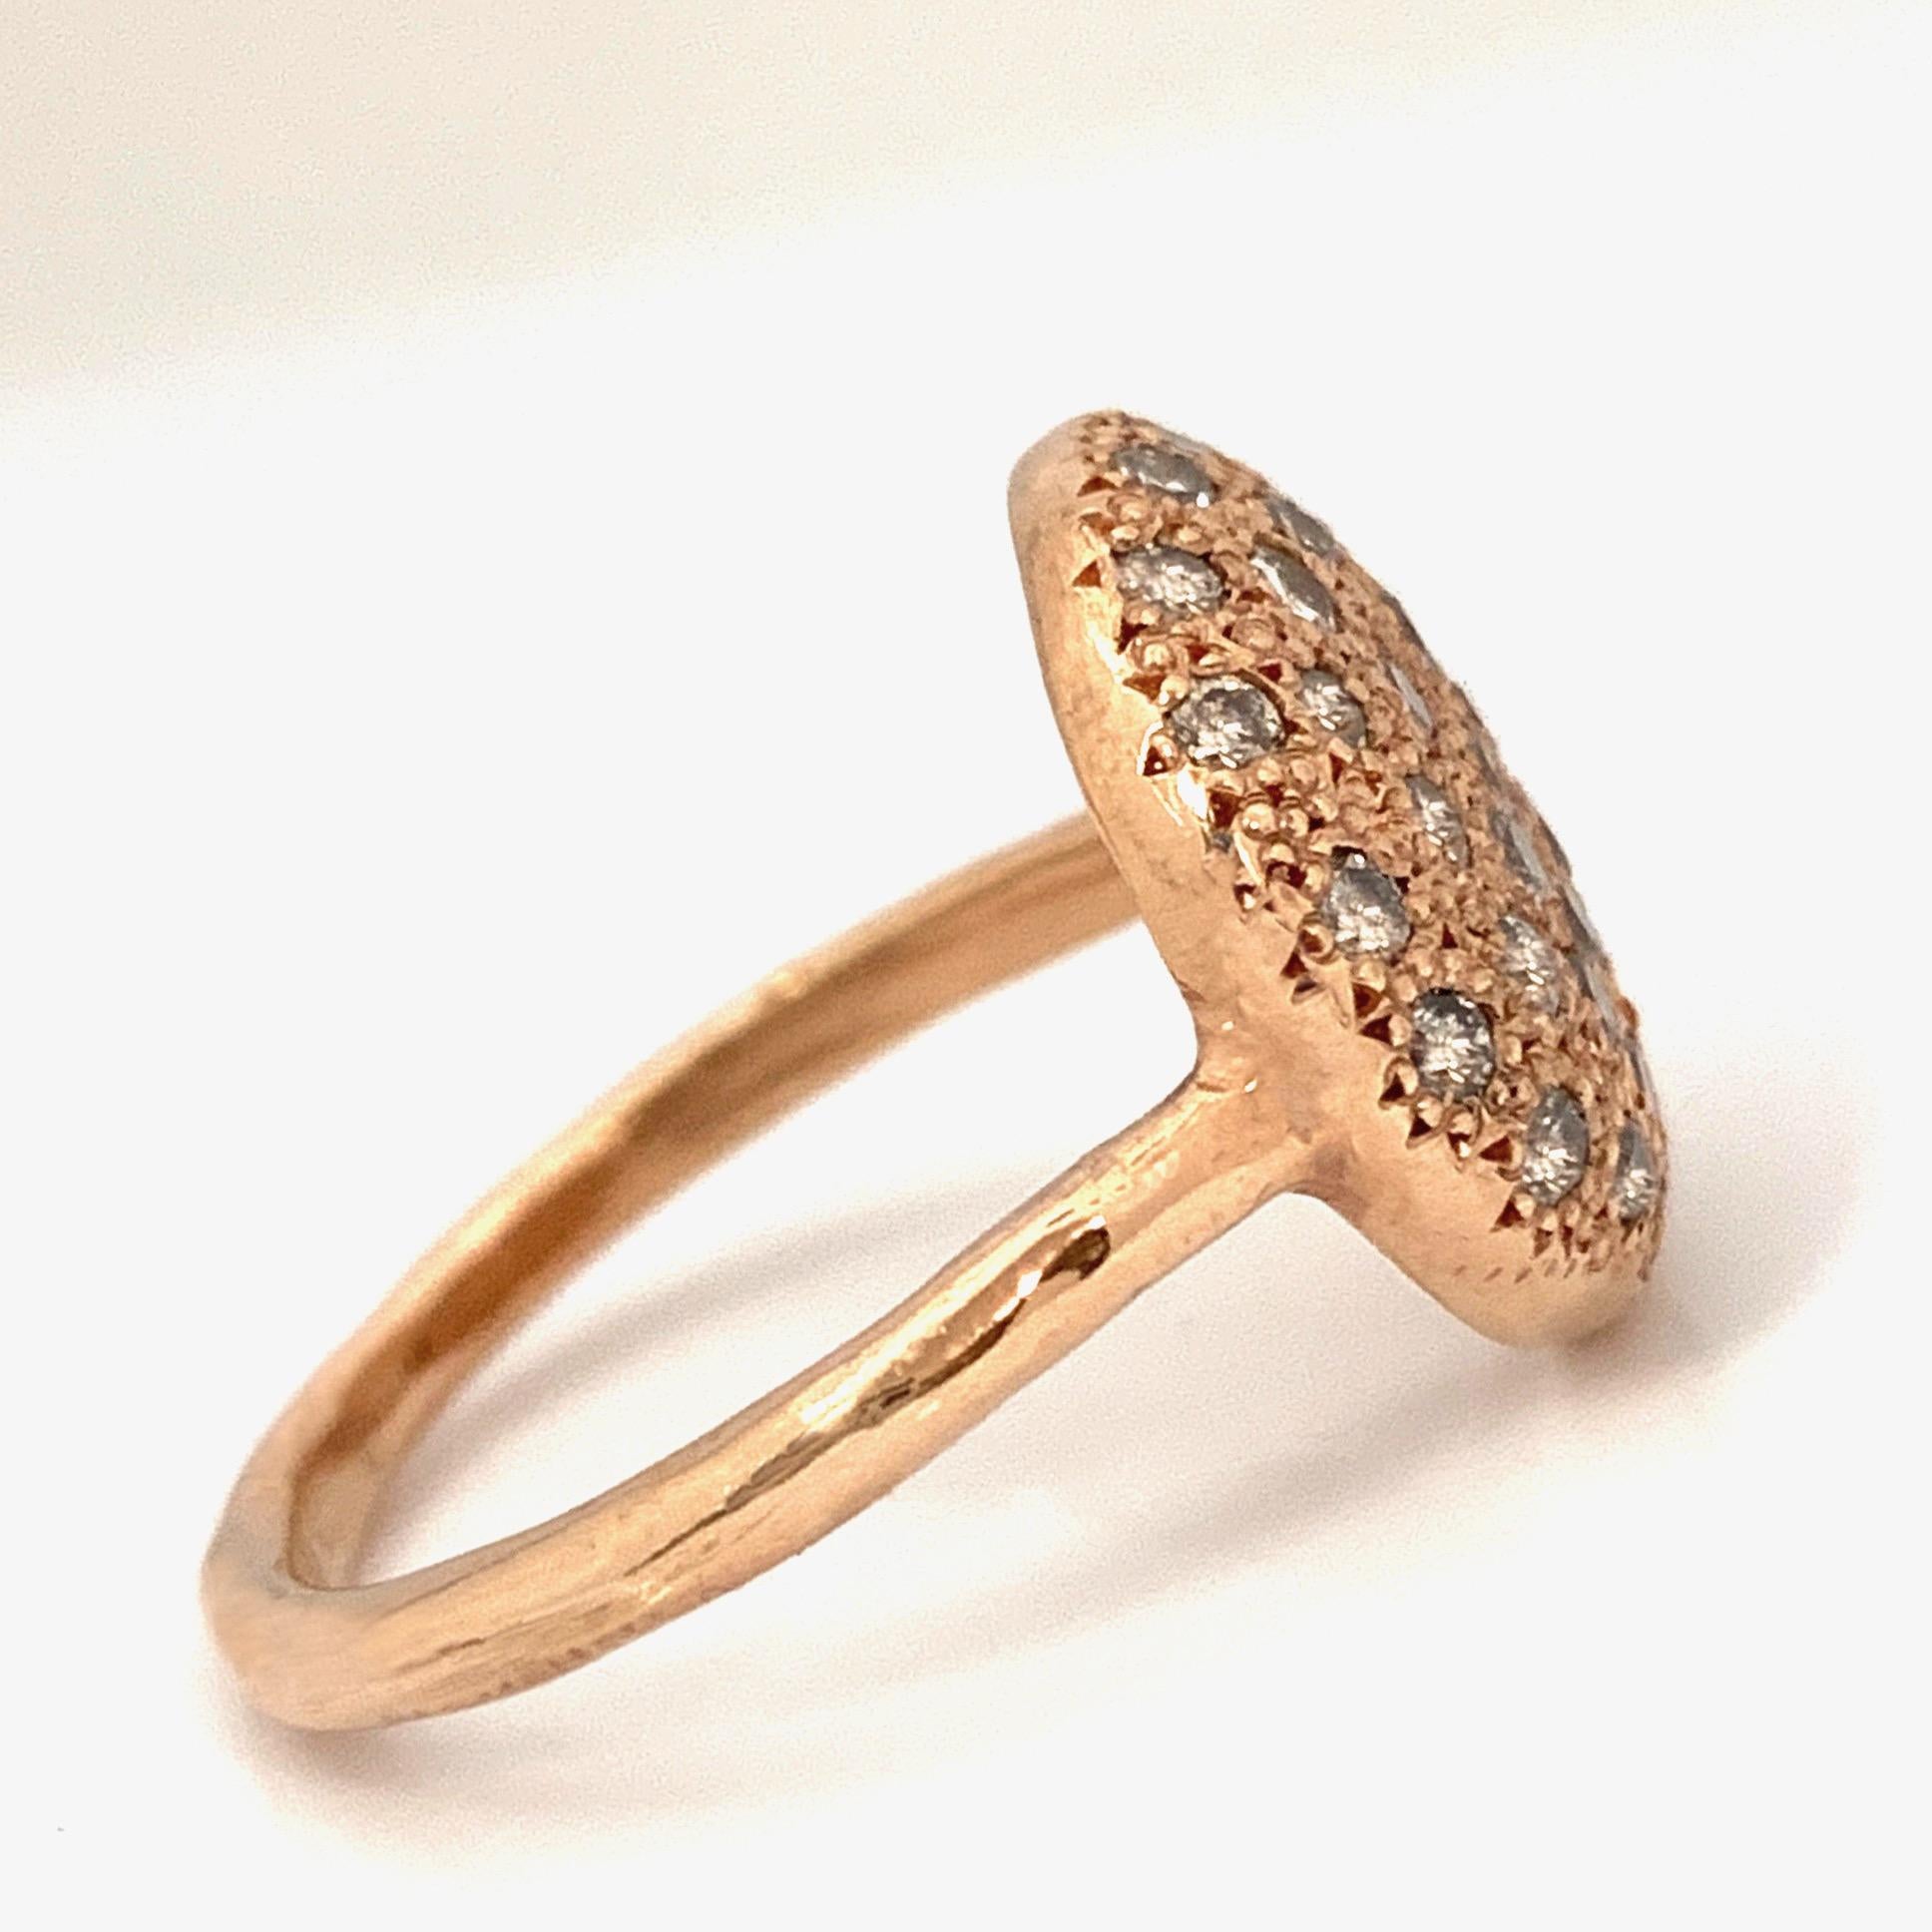 Every cookie is different and delicious, and so are Eytan's Cookie rings!  This one is a gorgeous shade of rose and is faced entirely with tiny beads, which give the gold its distinctive texture and provide the braces for 36 bright white melee